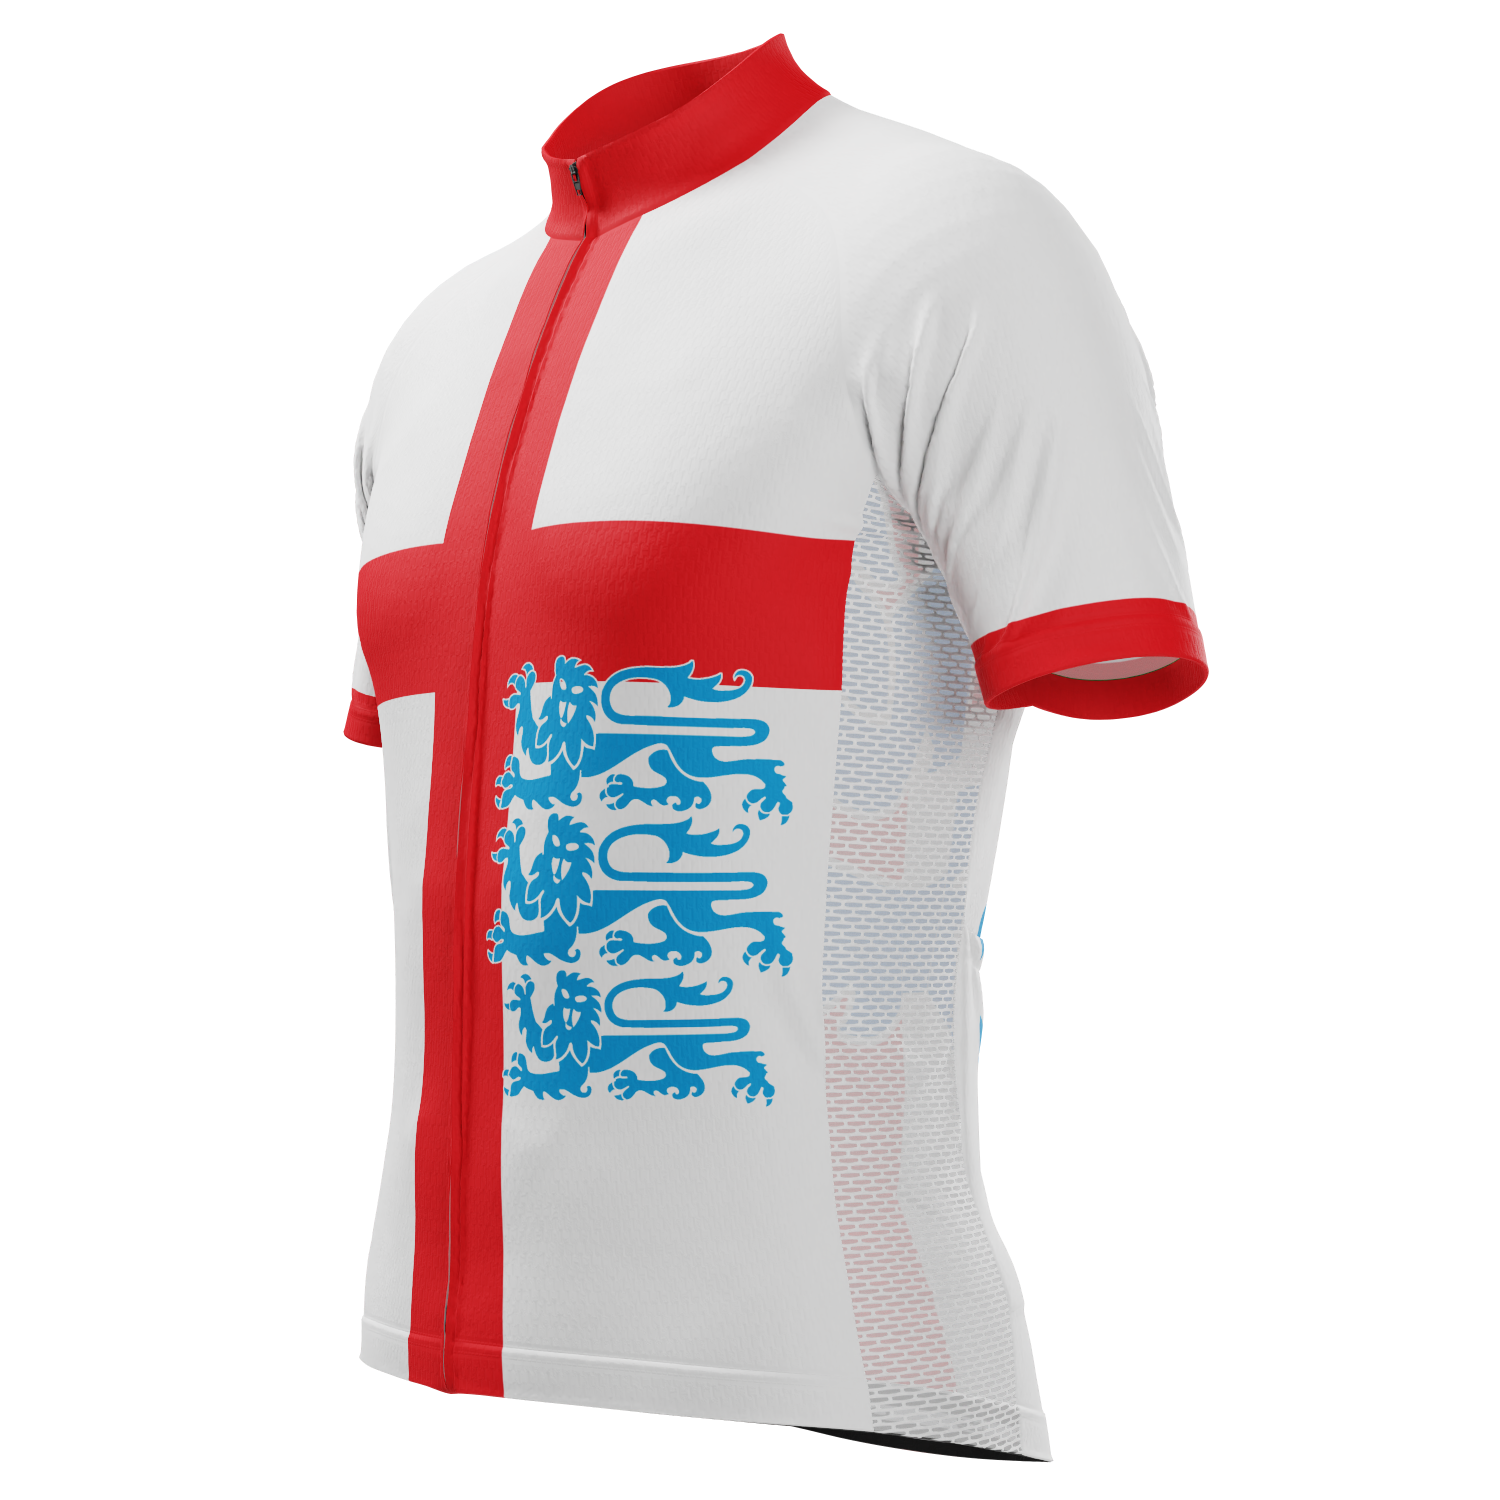 Men's Three Lions England National Flag Short Sleeve Cycling Jersey